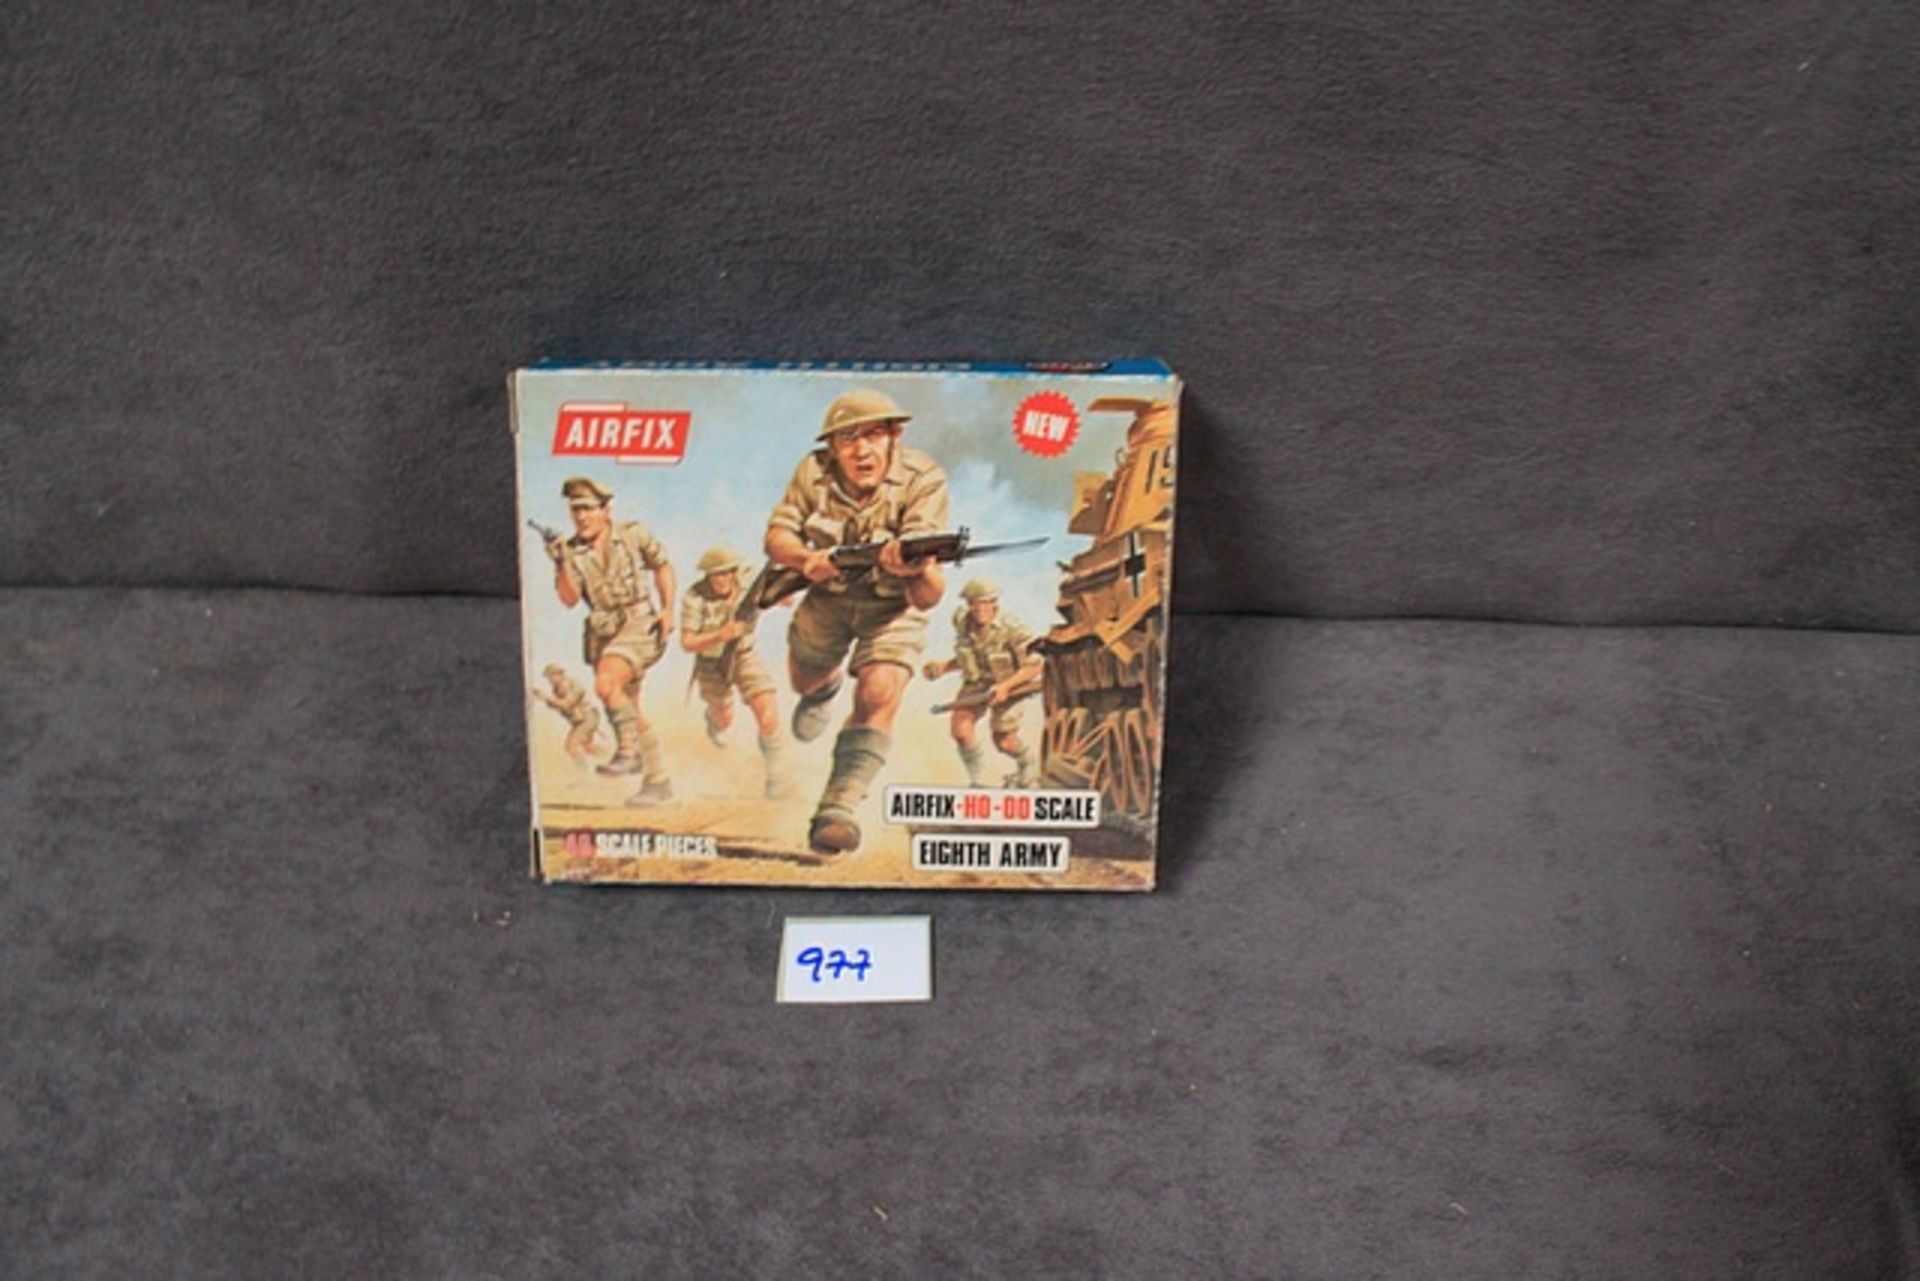 Airfix H0-00 Scale Eighth Army 48 figures in a firm excellent box